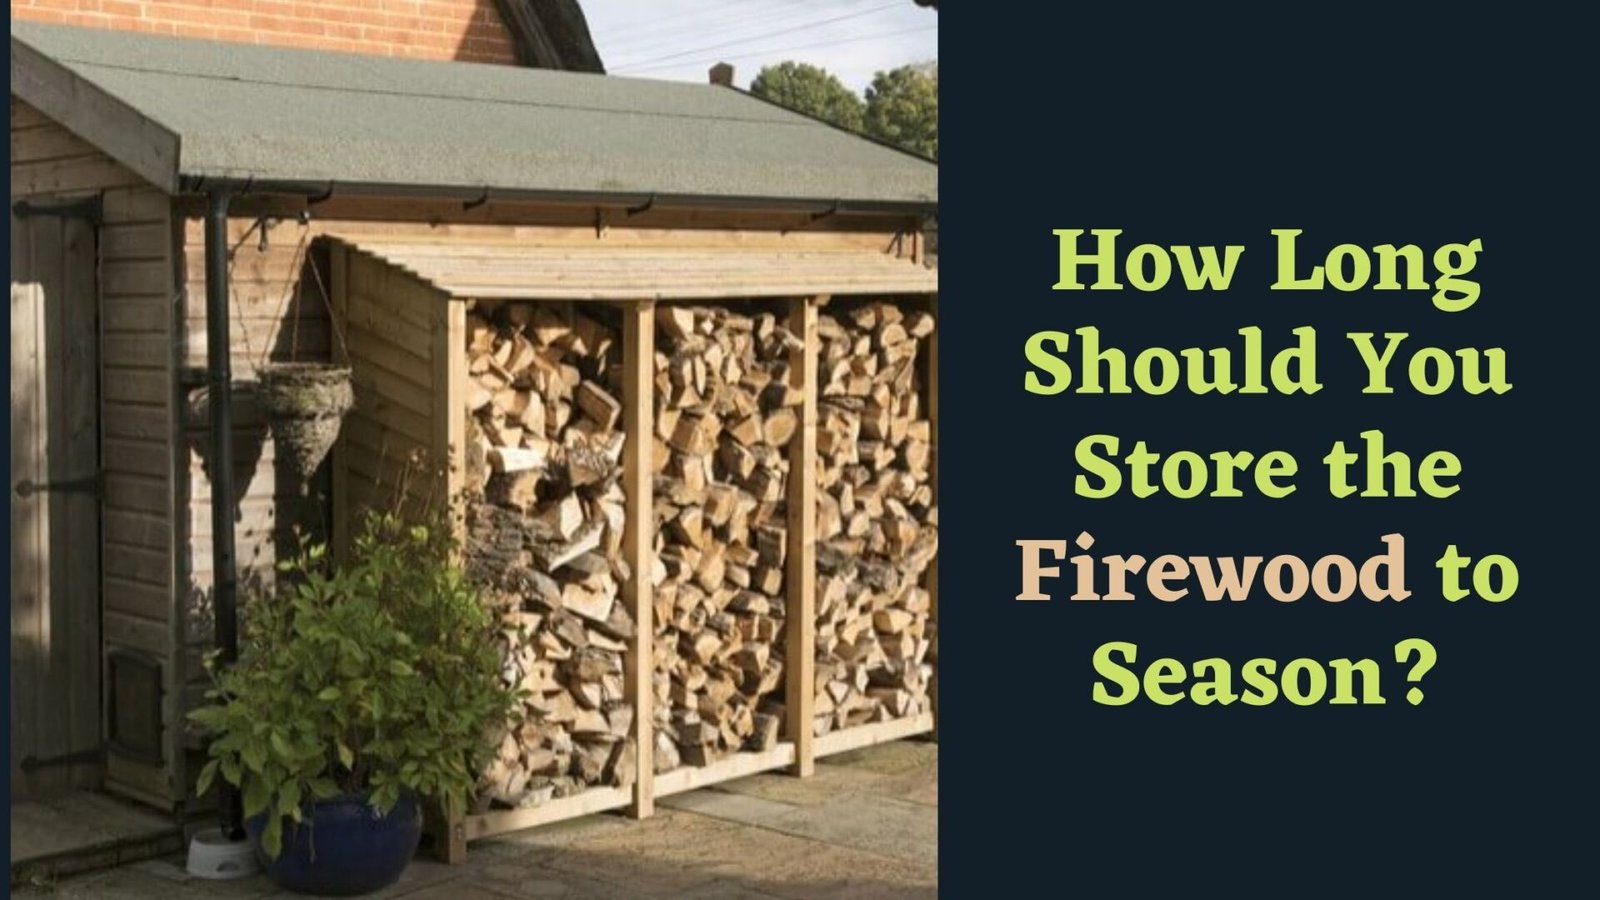 Best How Long Should You Store the Firewood to Season? 2021